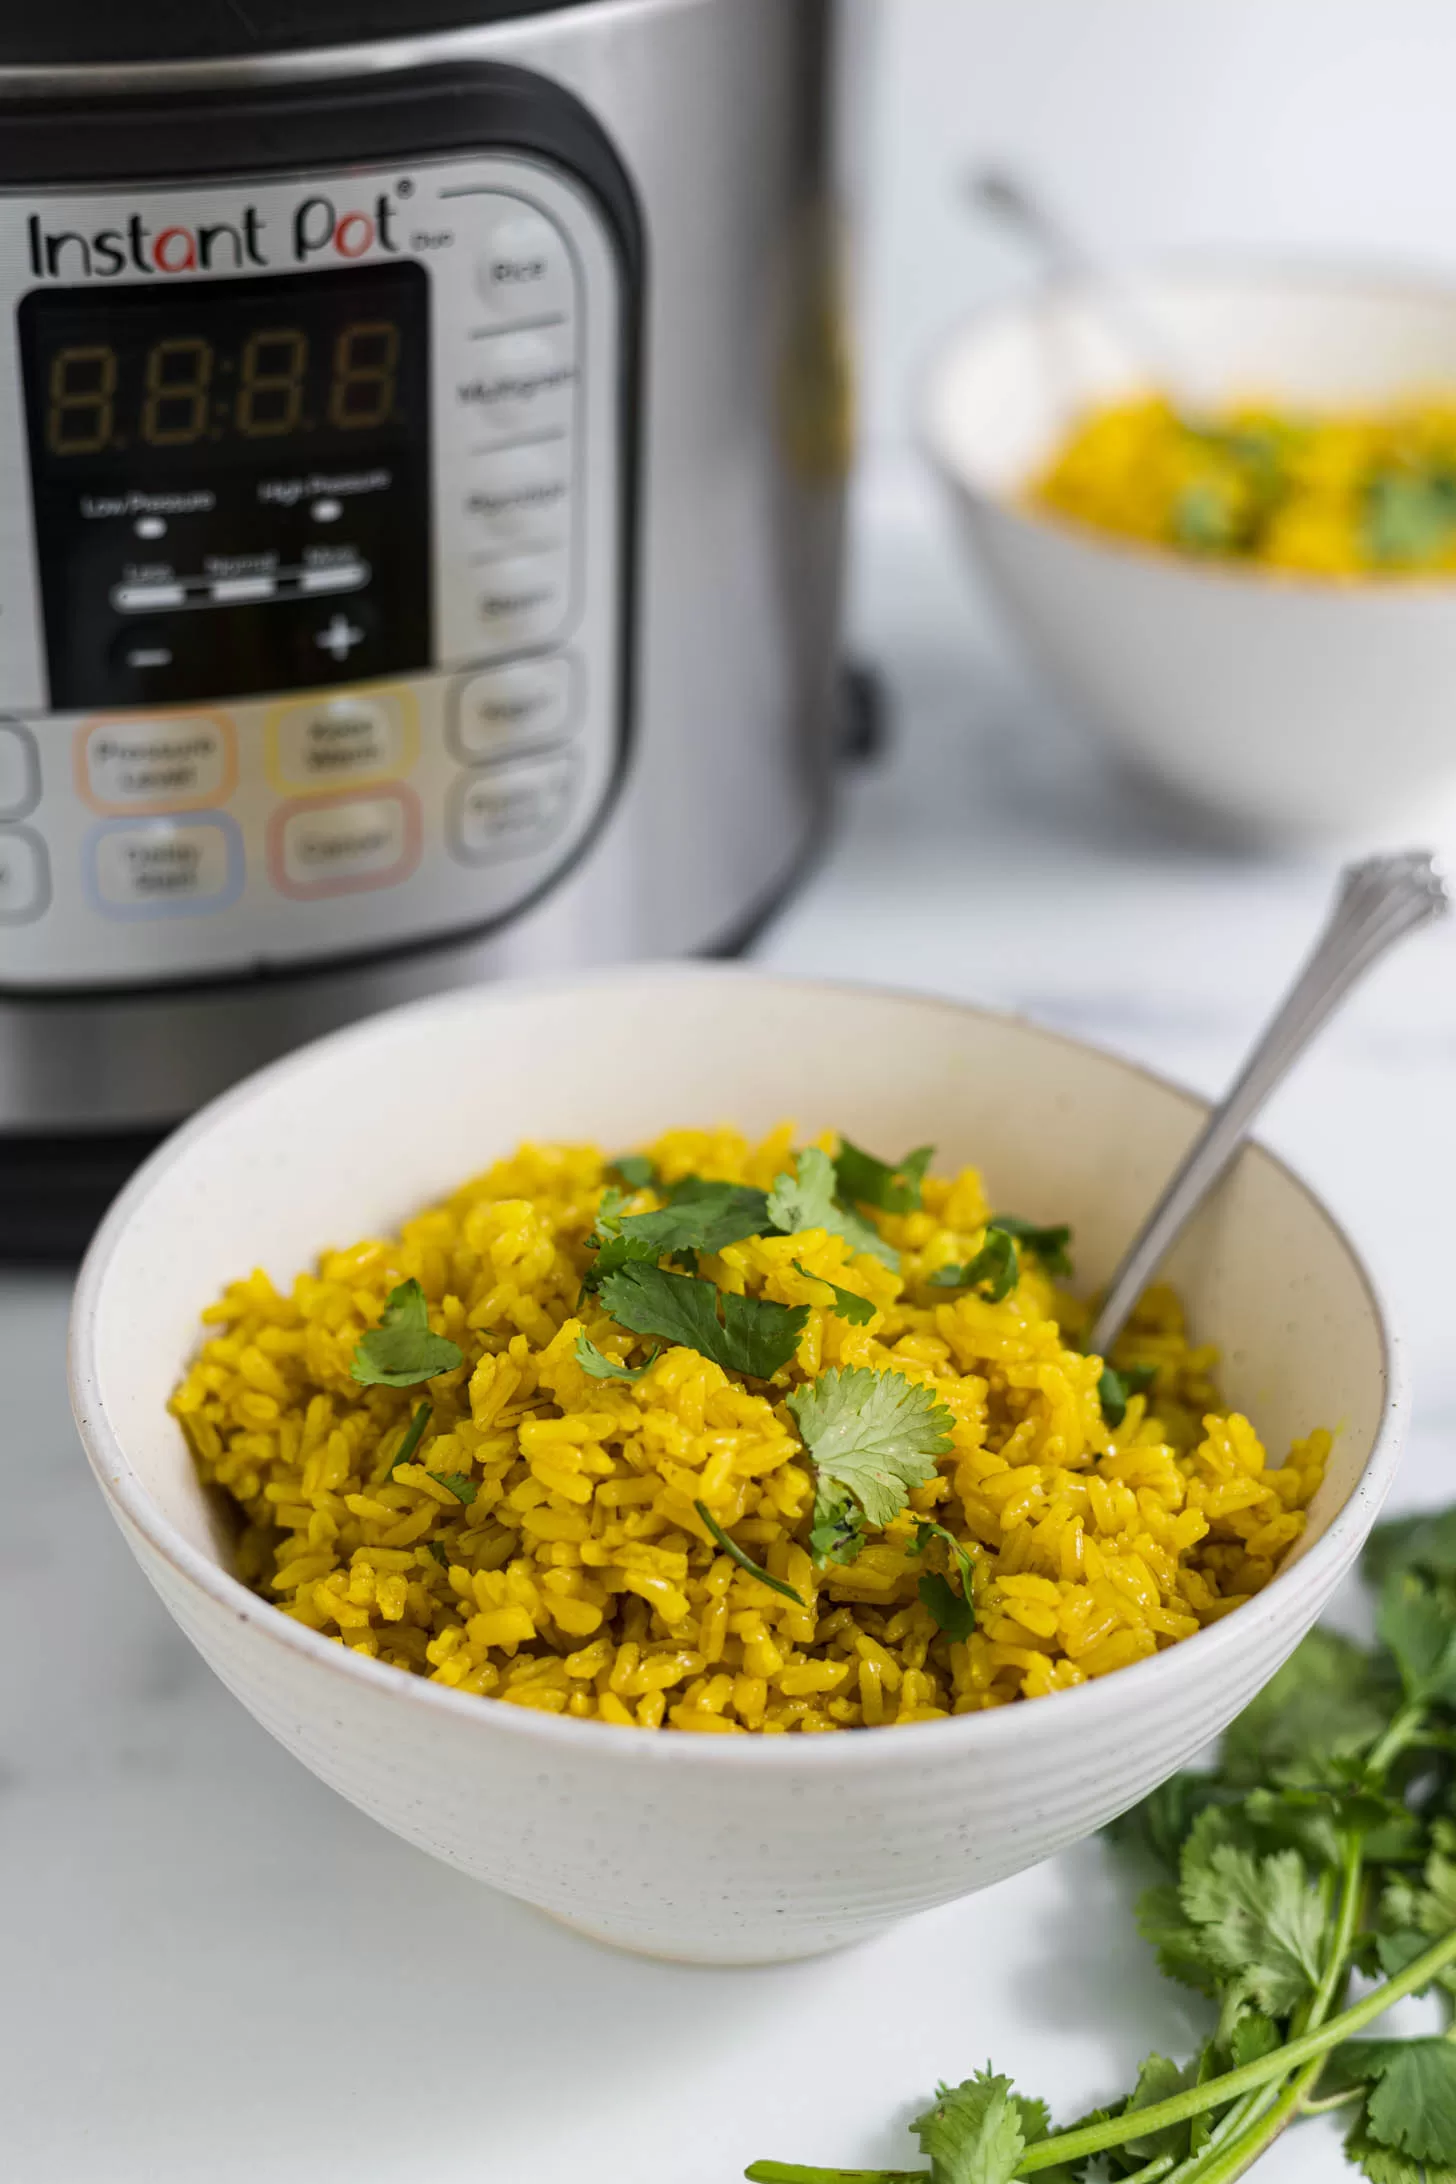 A bowl of turmeric rice with an instant pot behind it.